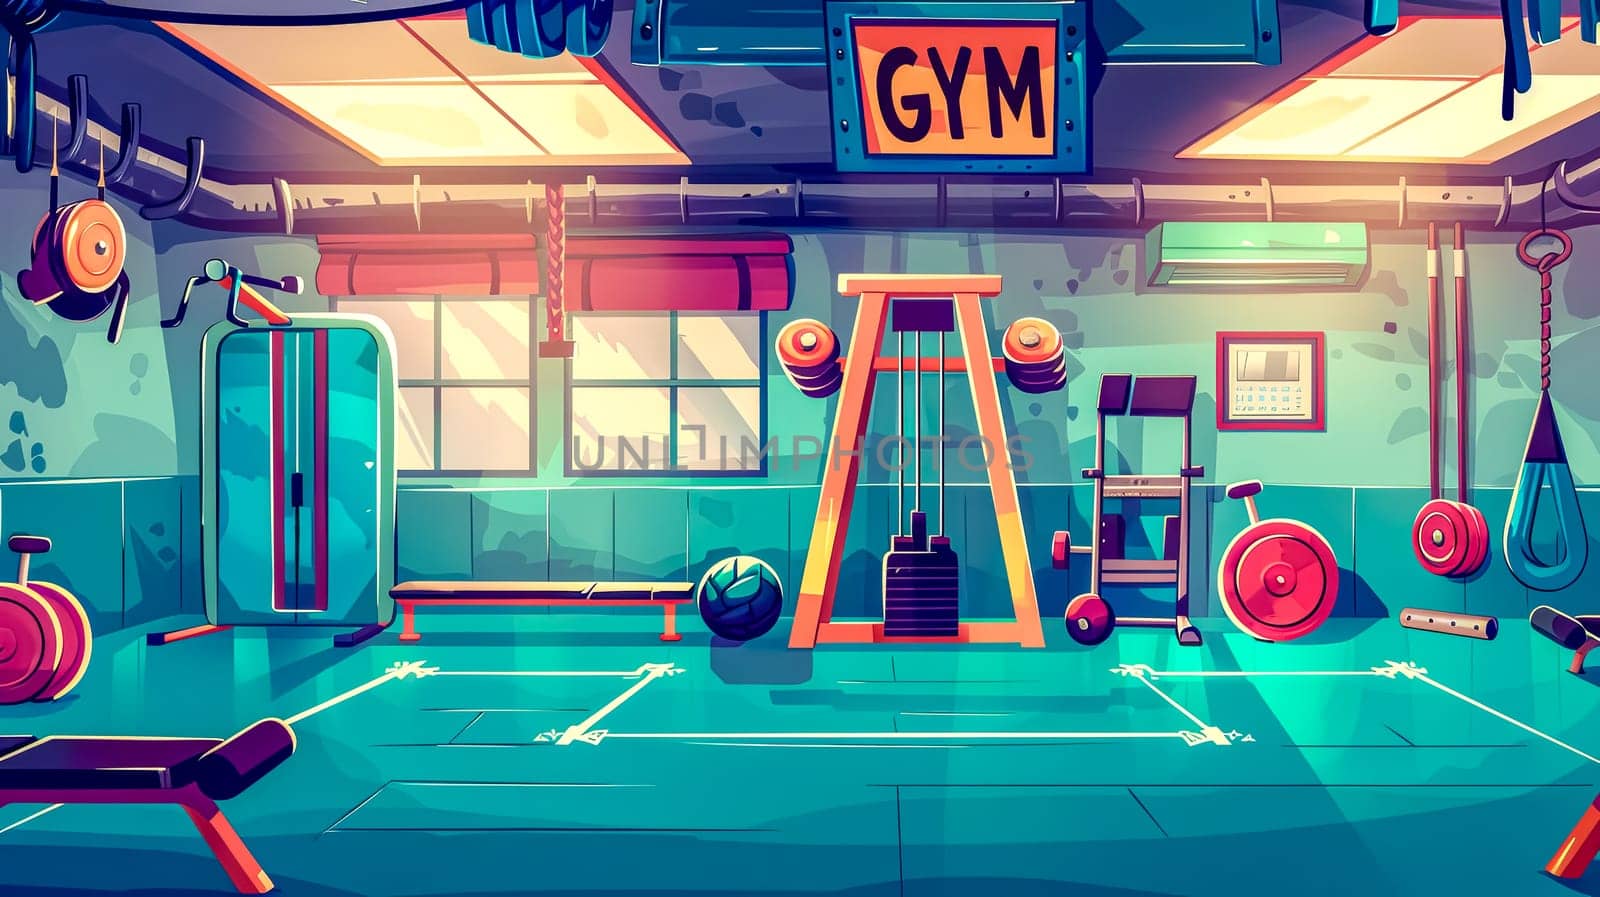 Vibrant illustration of an empty gym with retro design and equipment